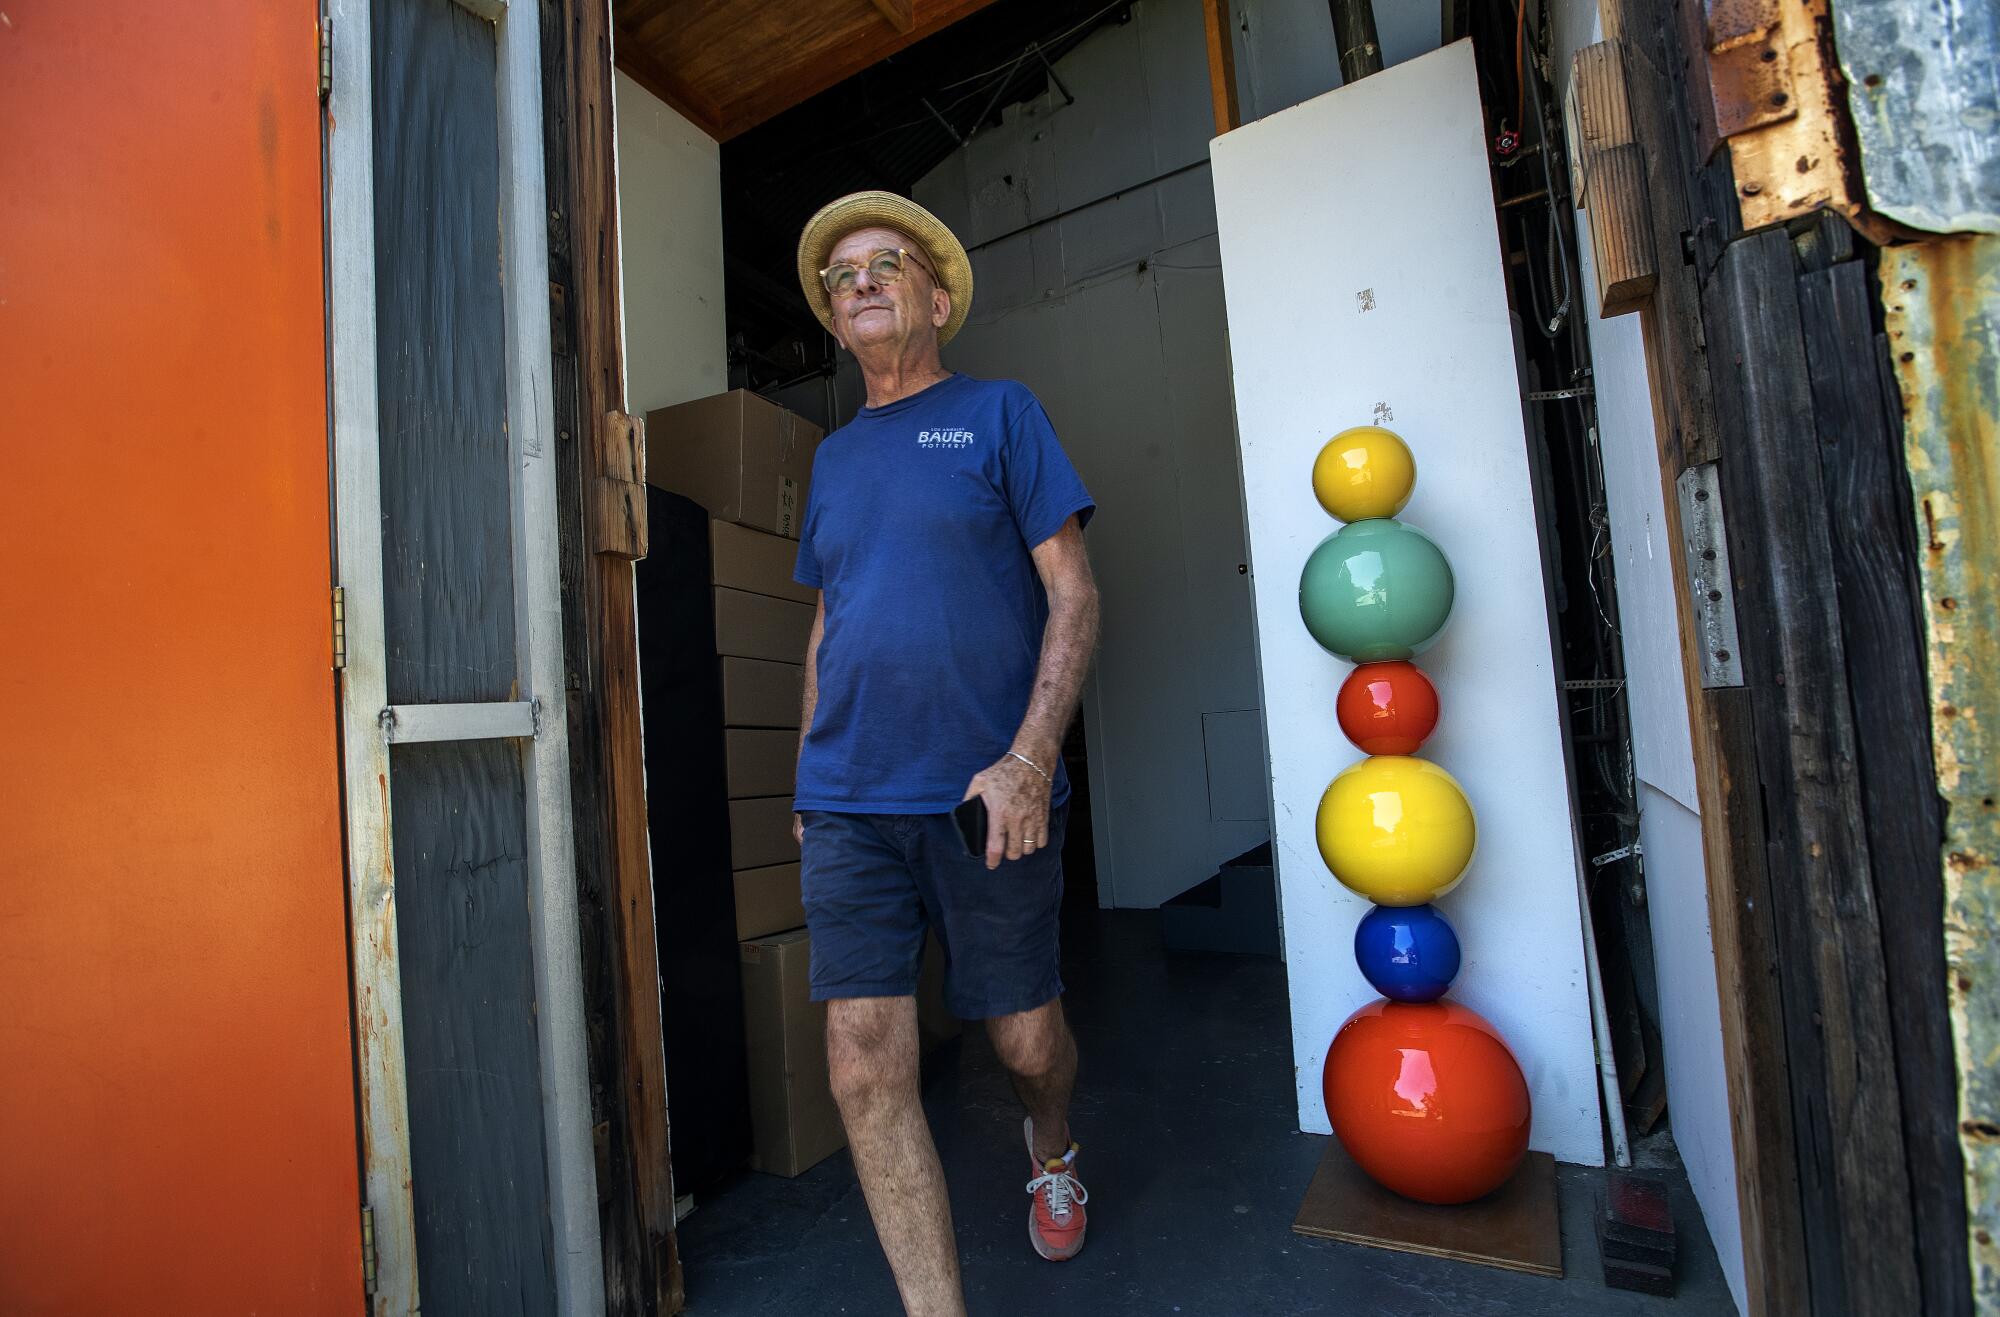 A man in a hat walks out a door next to a colorful tower of pottery balls